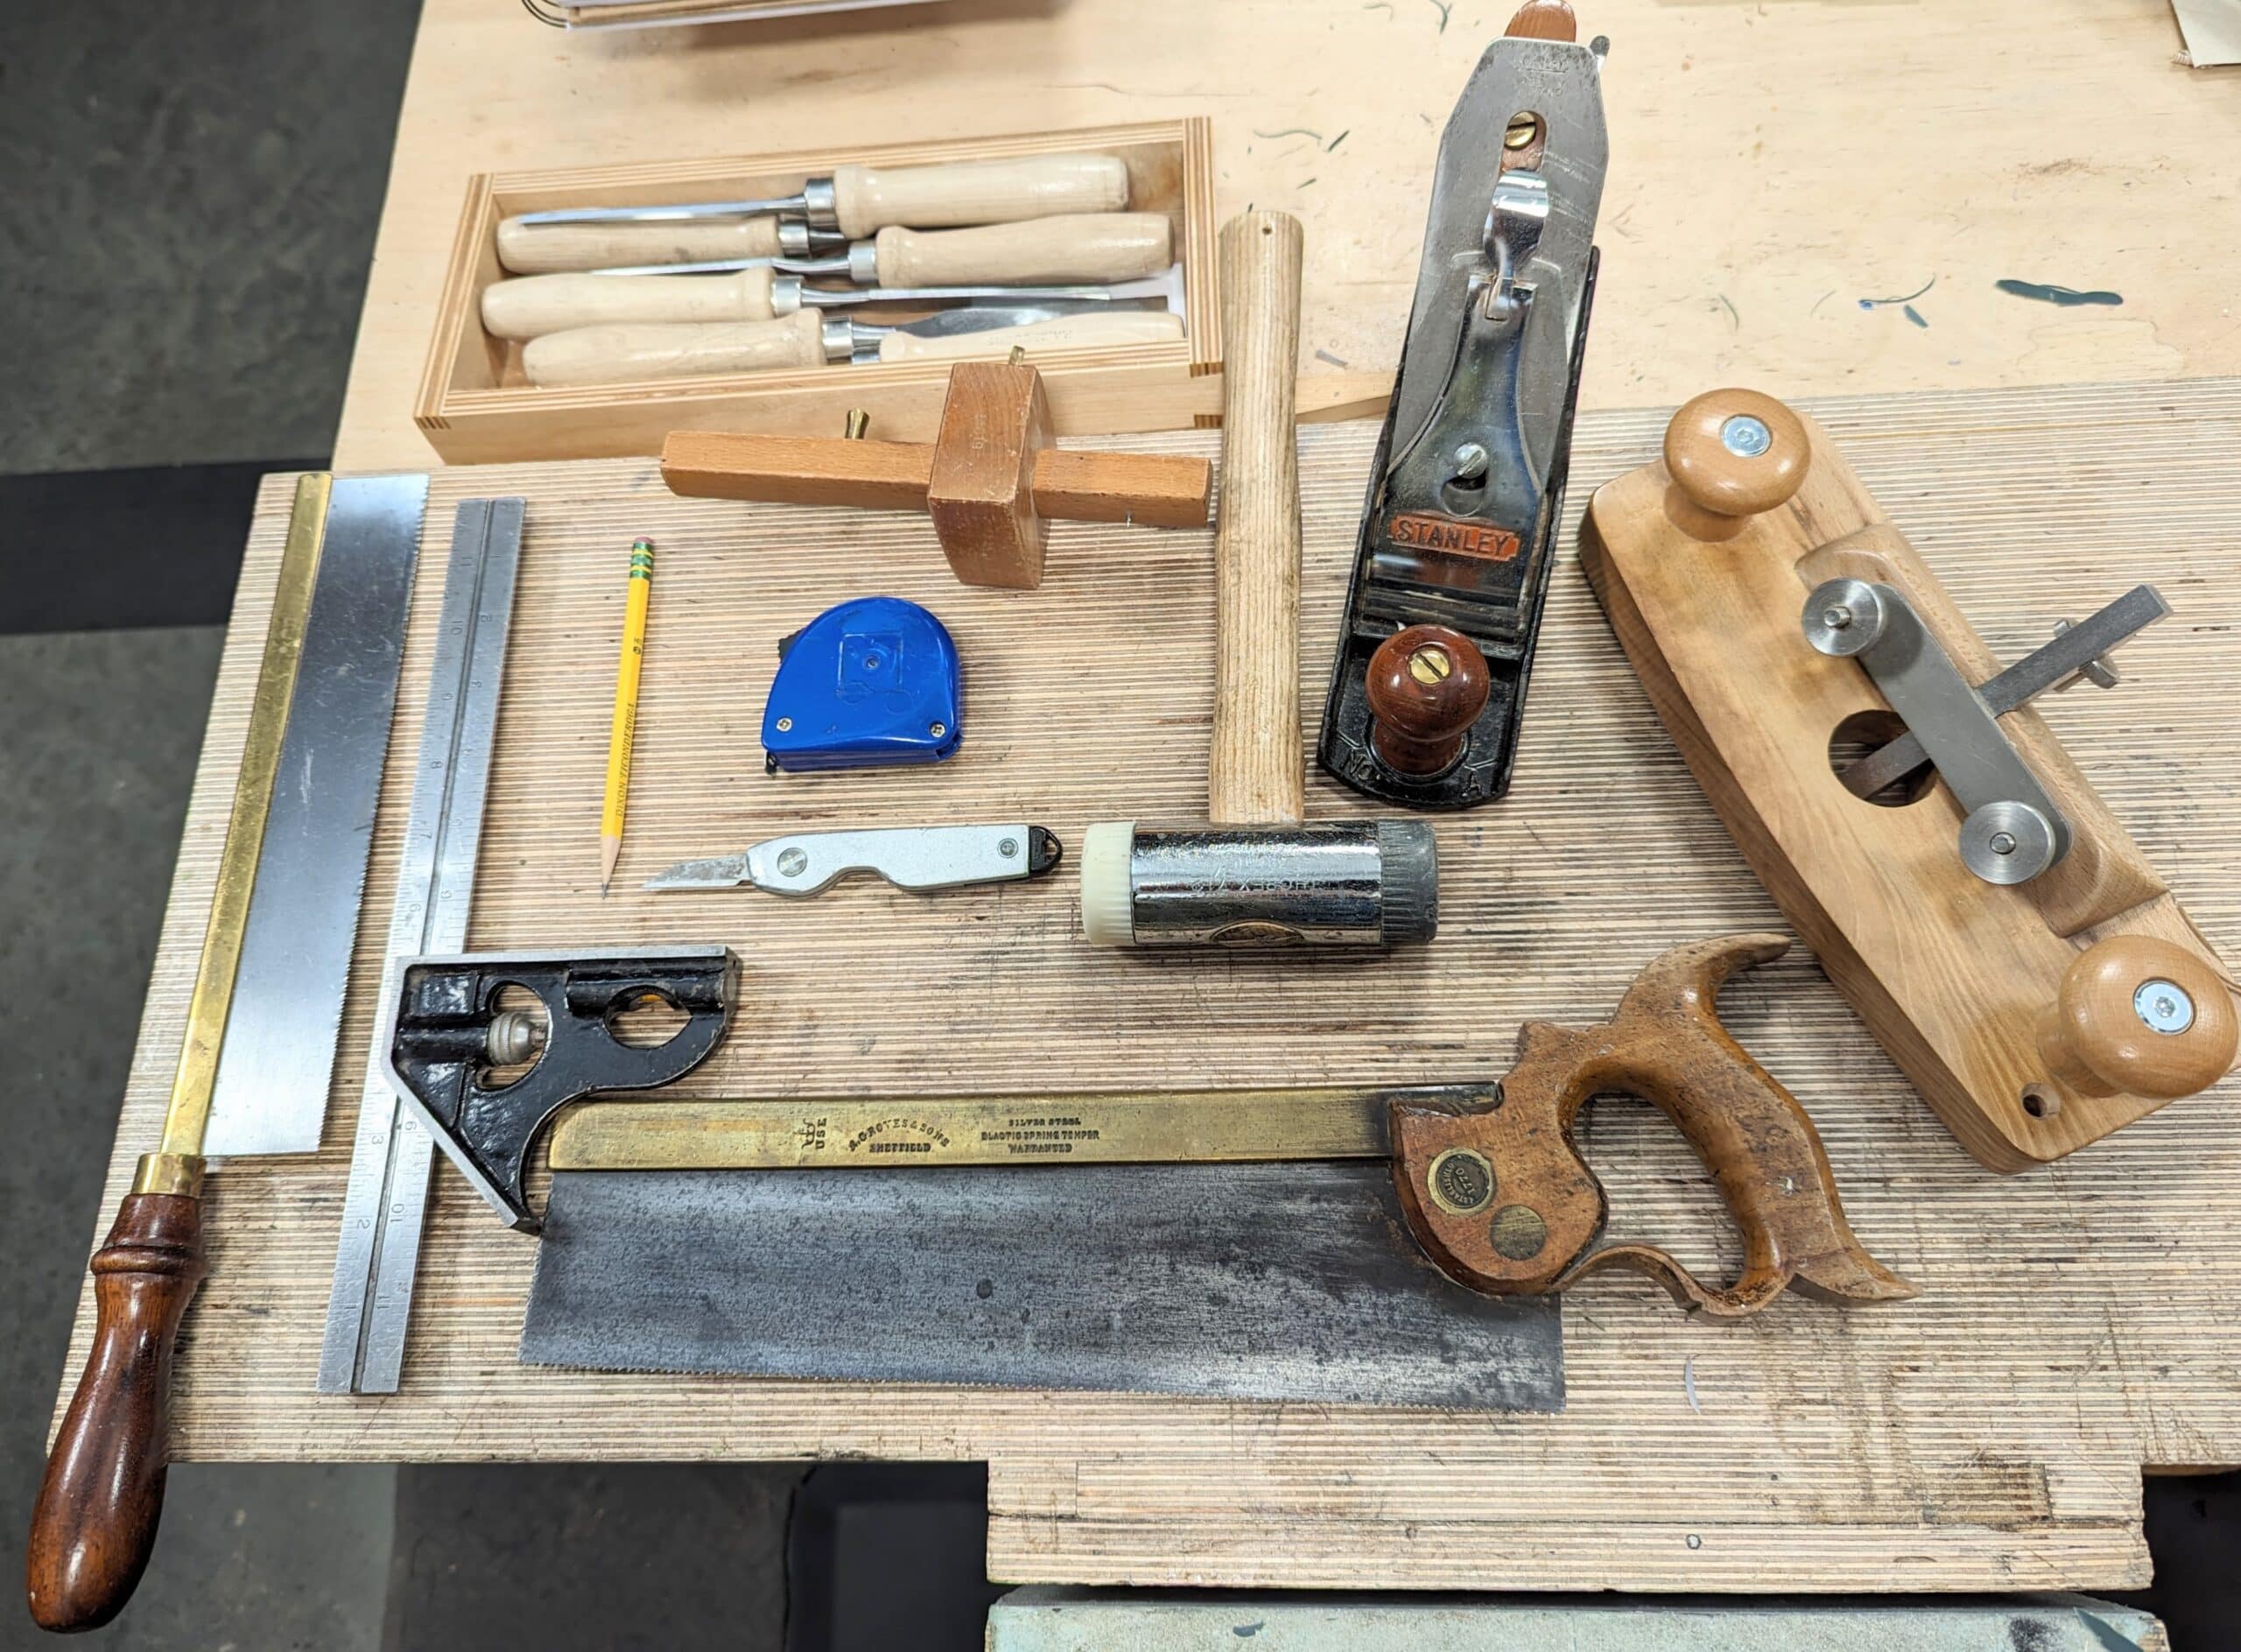 On Woodworking Squares and Working Wood - Paul Sellers' Blog